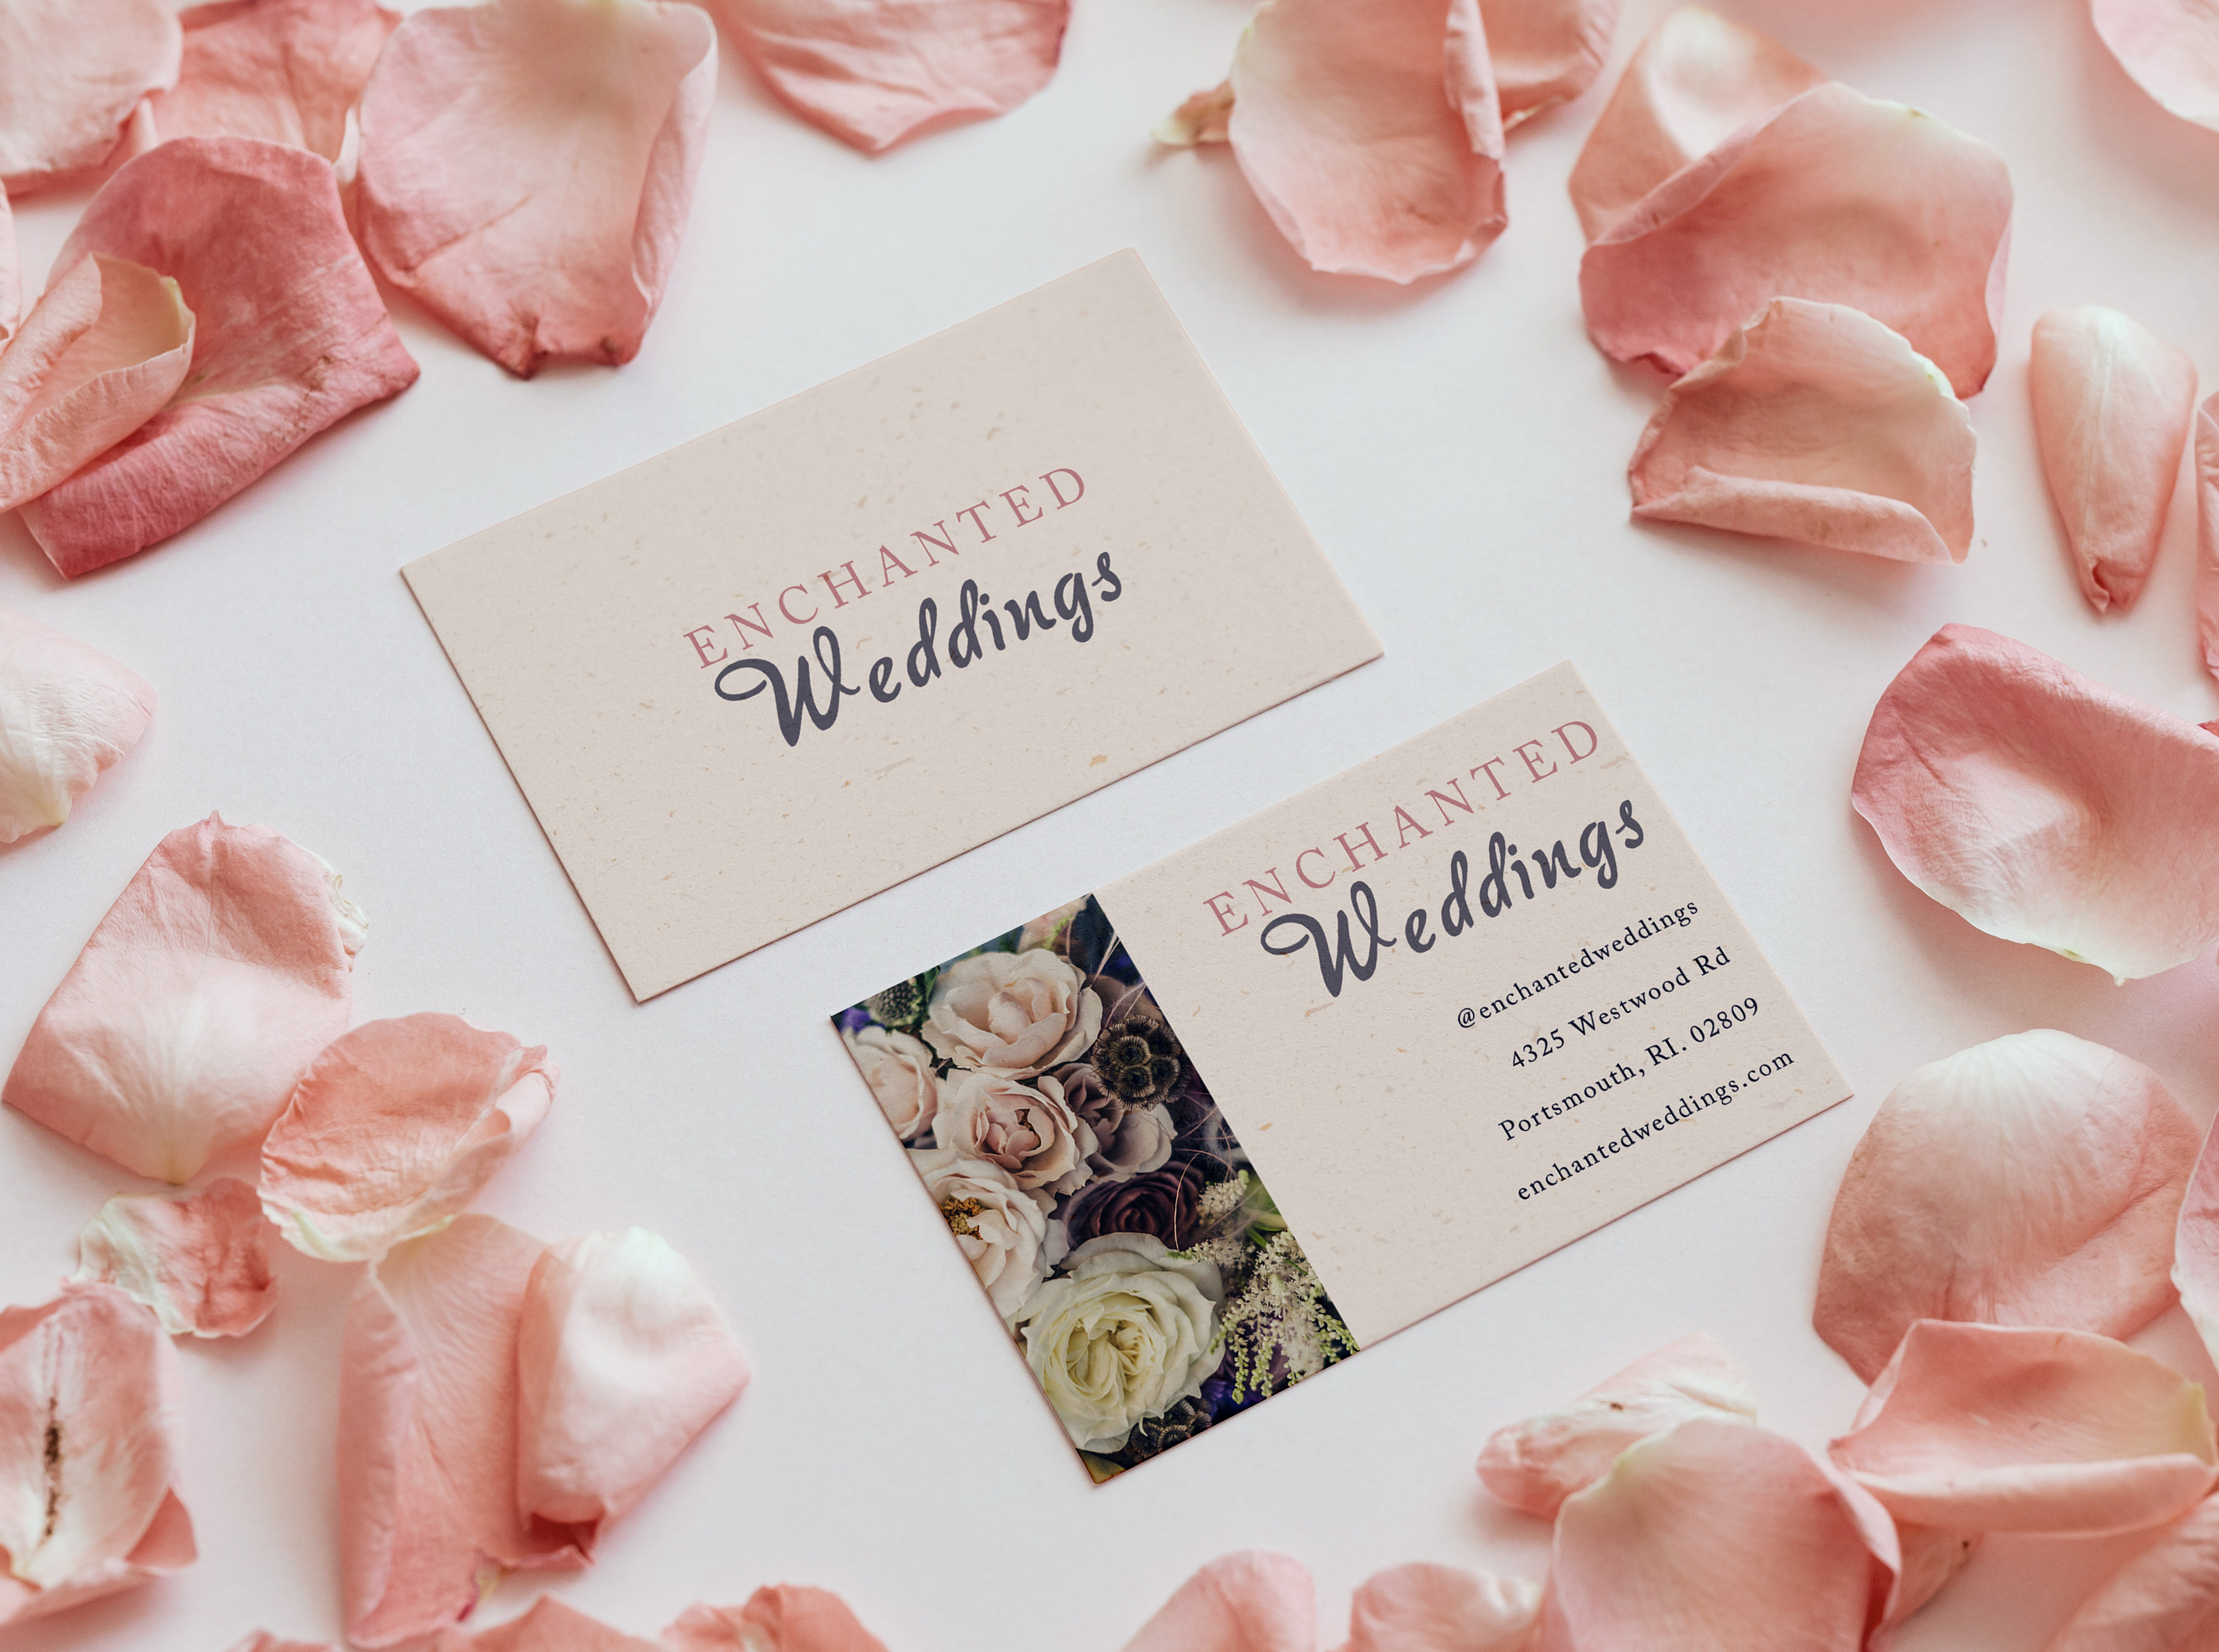 Business cards for Enchanted Weddings.

Photo Credit: Jez Timms (on Unsplash)